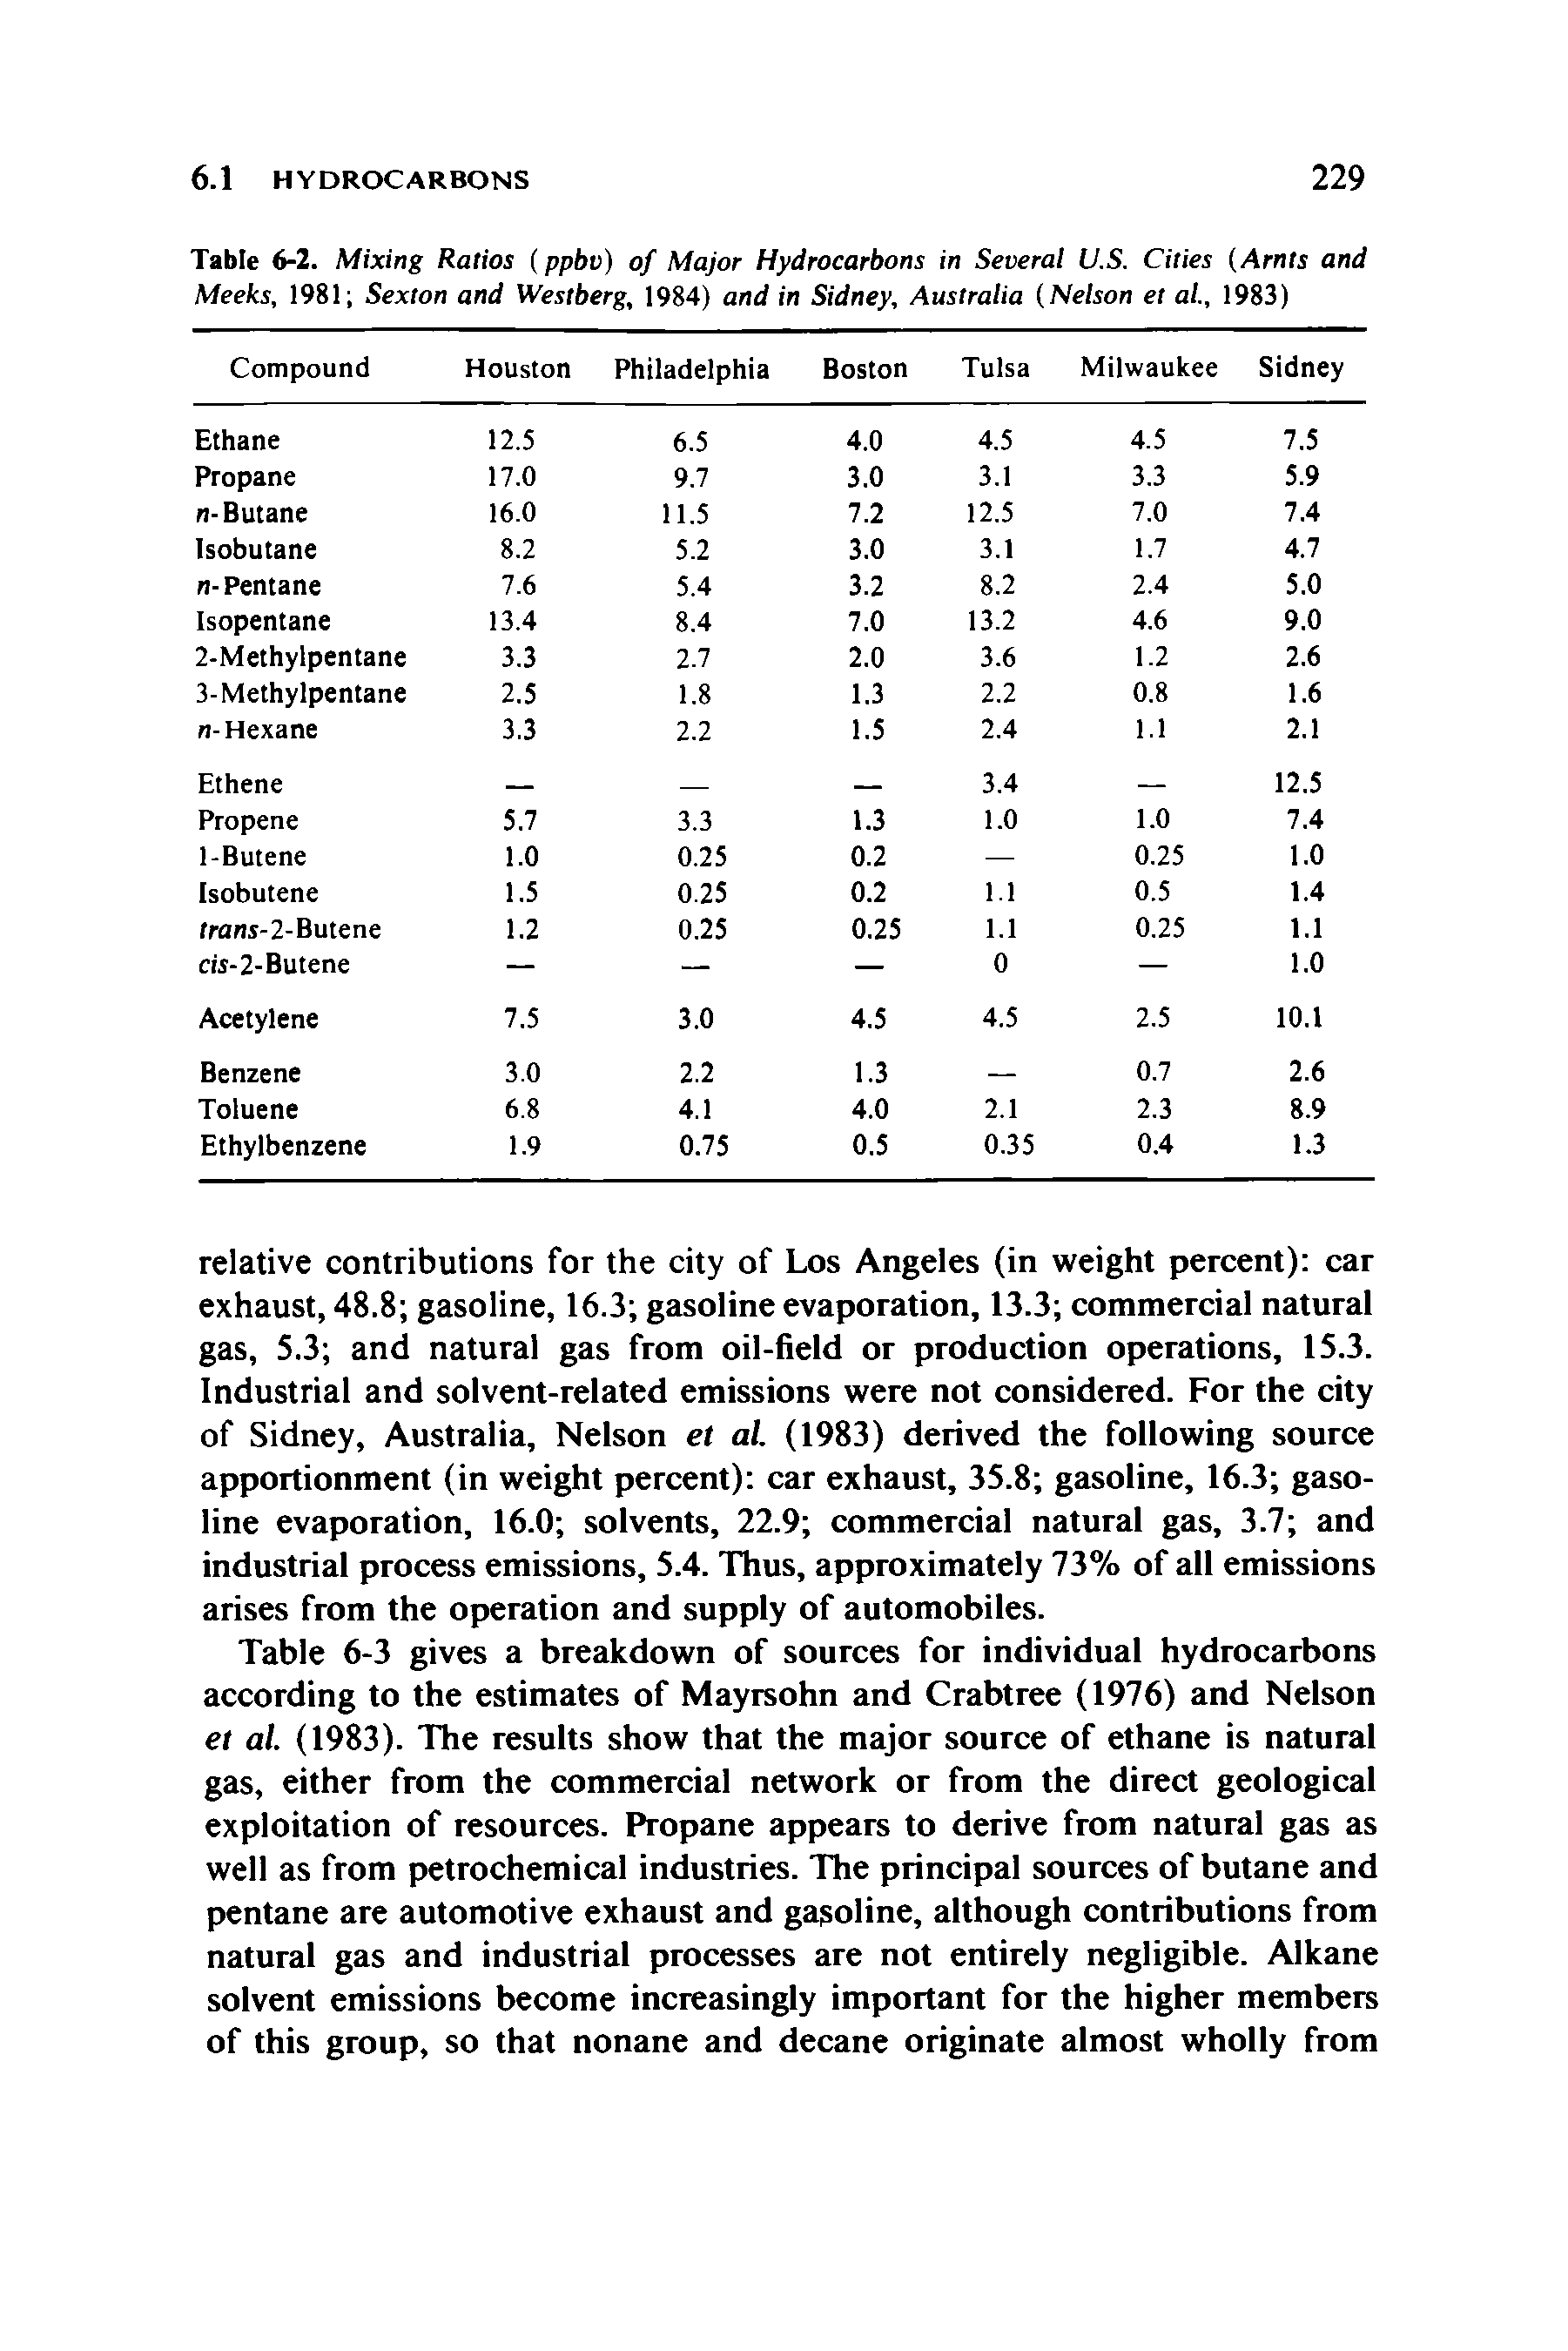 Table 6-2. Mixing Ratios (ppbv) of Major Hydrocarbons in Several U.S. Cities (Arnts and Meeks, 1981 Sexton and Westberg, 1984) and in Sidney, Australia (Nelson et al., 1983)...